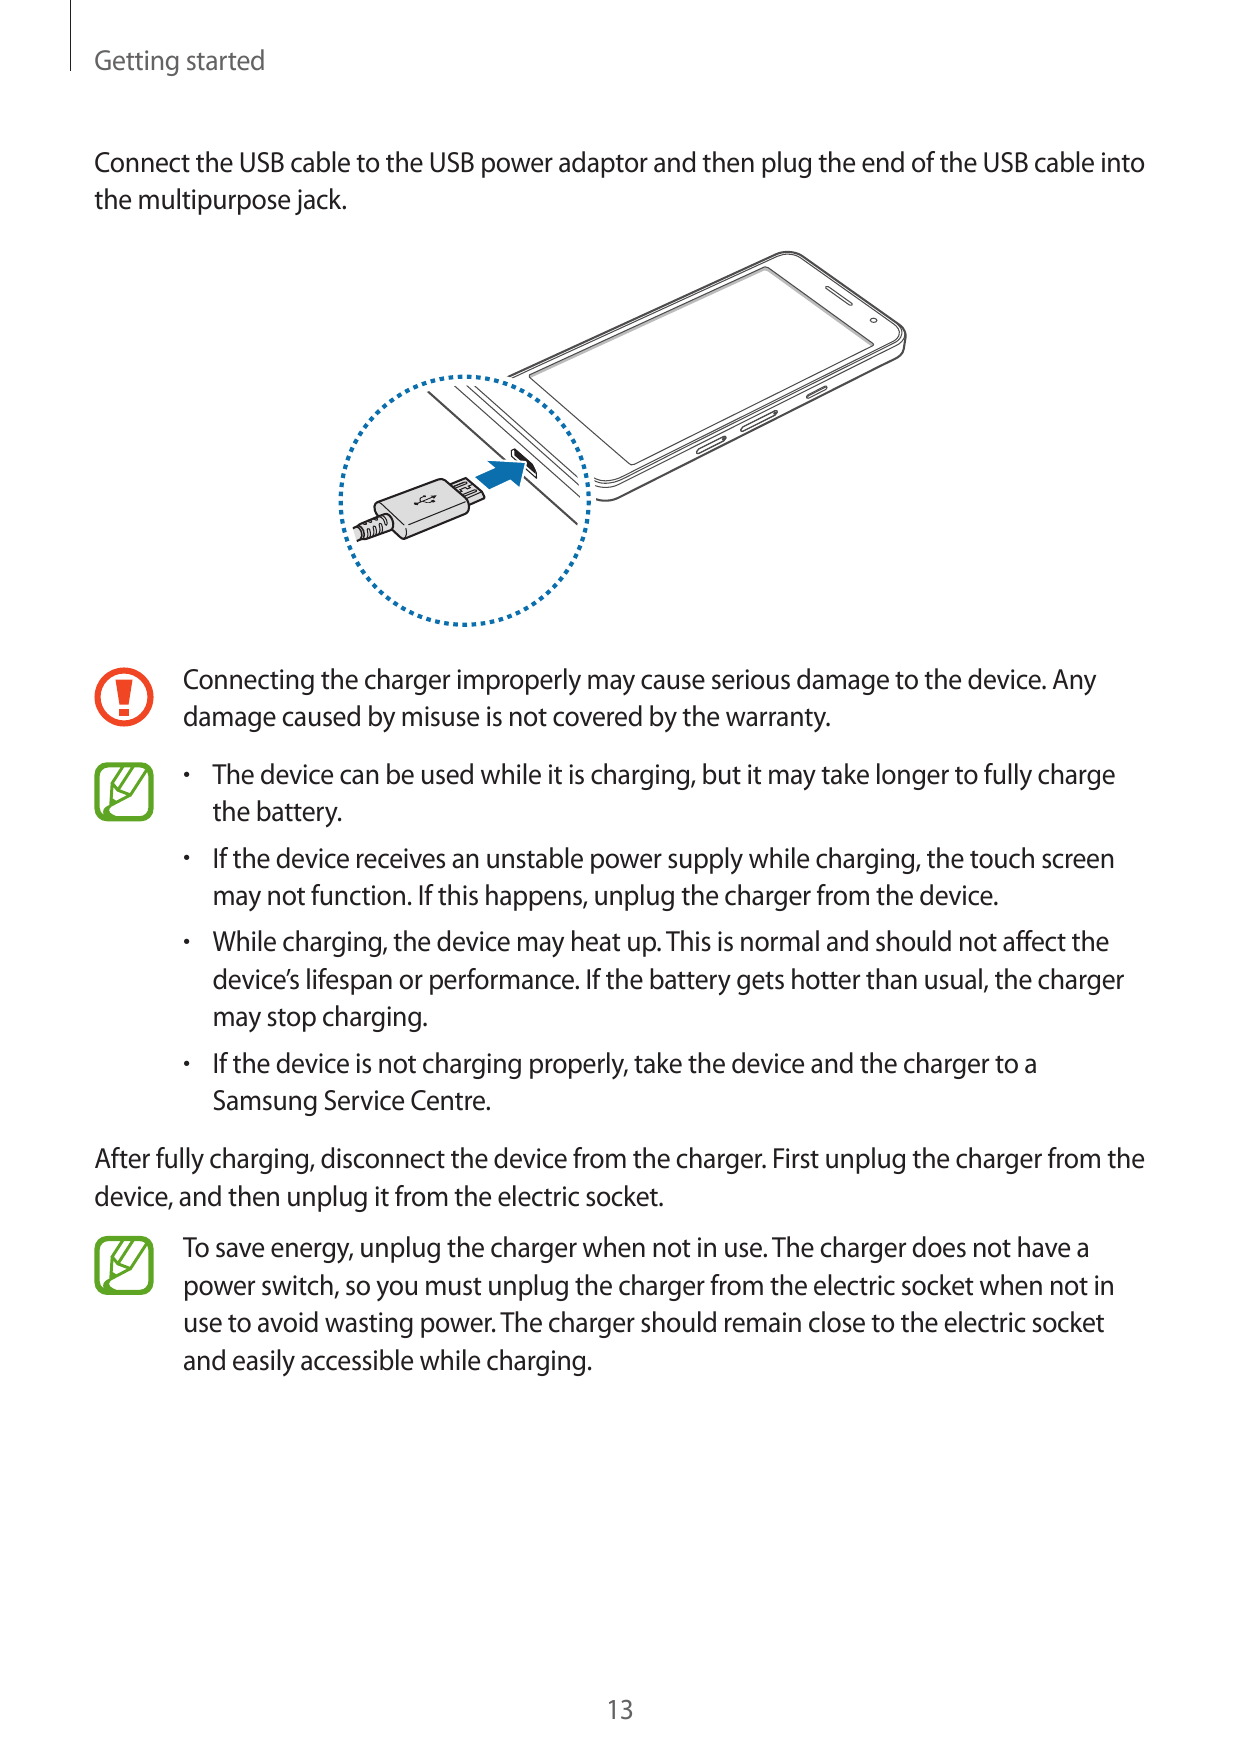 Getting startedConnect the USB cable to the USB power adaptor and then plug the end of the USB cable intothe multipurpose jack.C